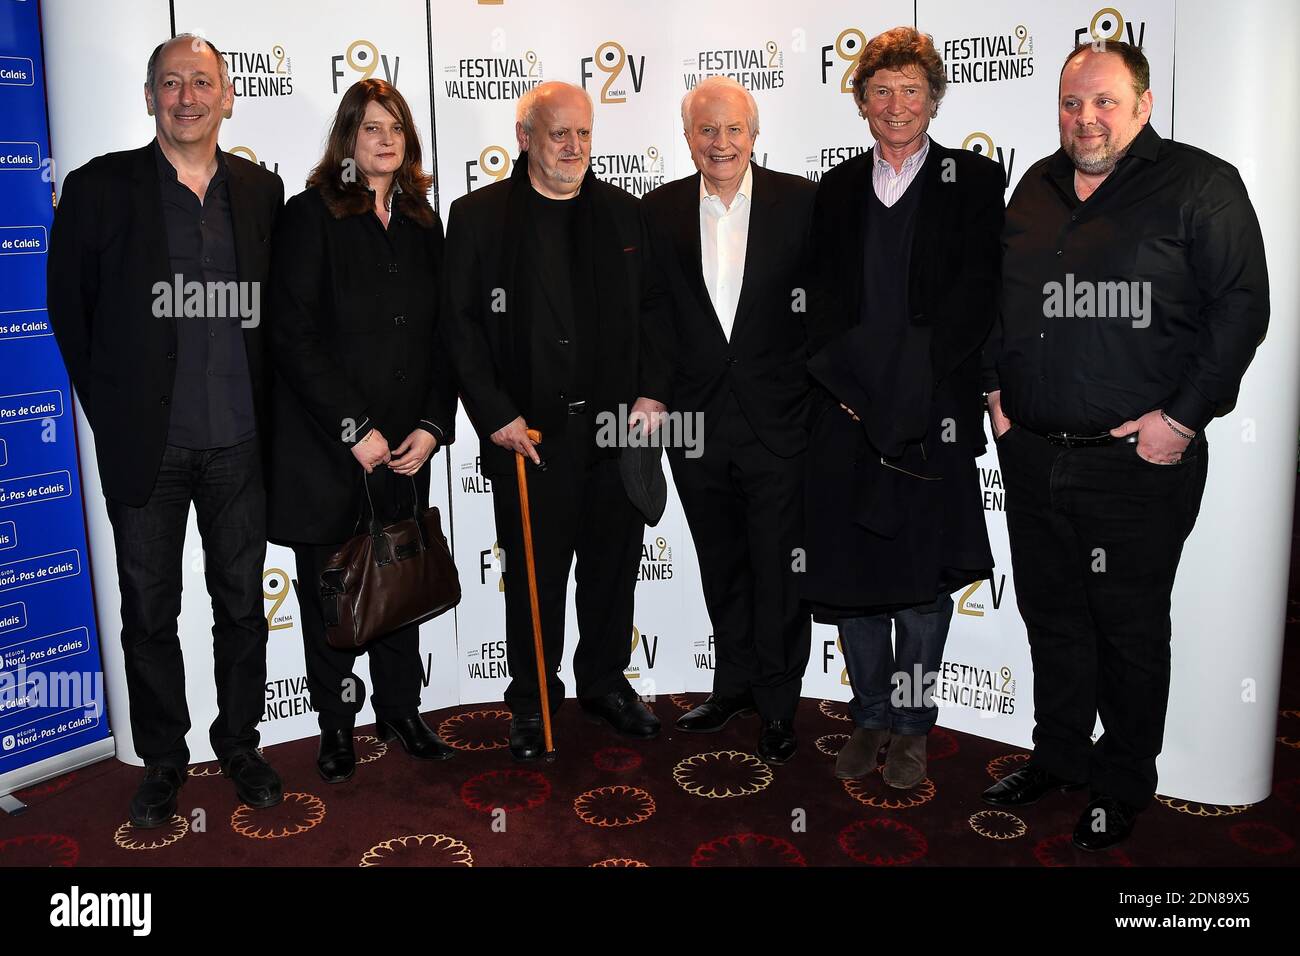 Sam Karmann, Sophie Fillieres, Jacques Bral, Andre Dussollier, Etienne Chatilliez and Gregory Gadebois at the Festival 2 Valenciennes closing ceremony, France, on March 28, 2015. Photo by Nicolas Briquet/ABACAPRESS.COM Stock Photo